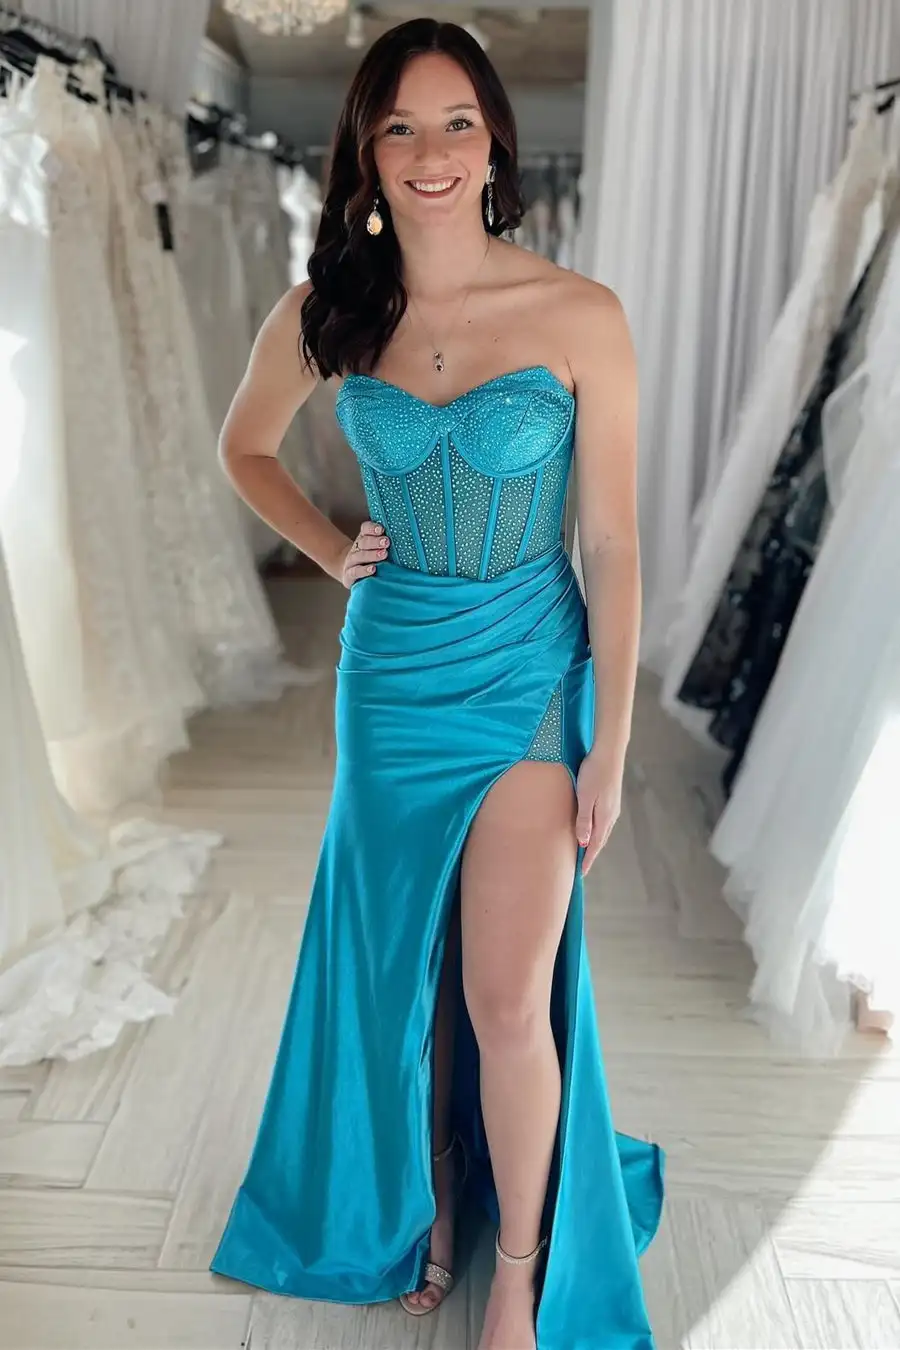 

Royal Blue Rhinestone Strapless Prom Dress Mermaid Long Formal Dress with Slit Wedding Guest Ruched Foraml Evening Gown